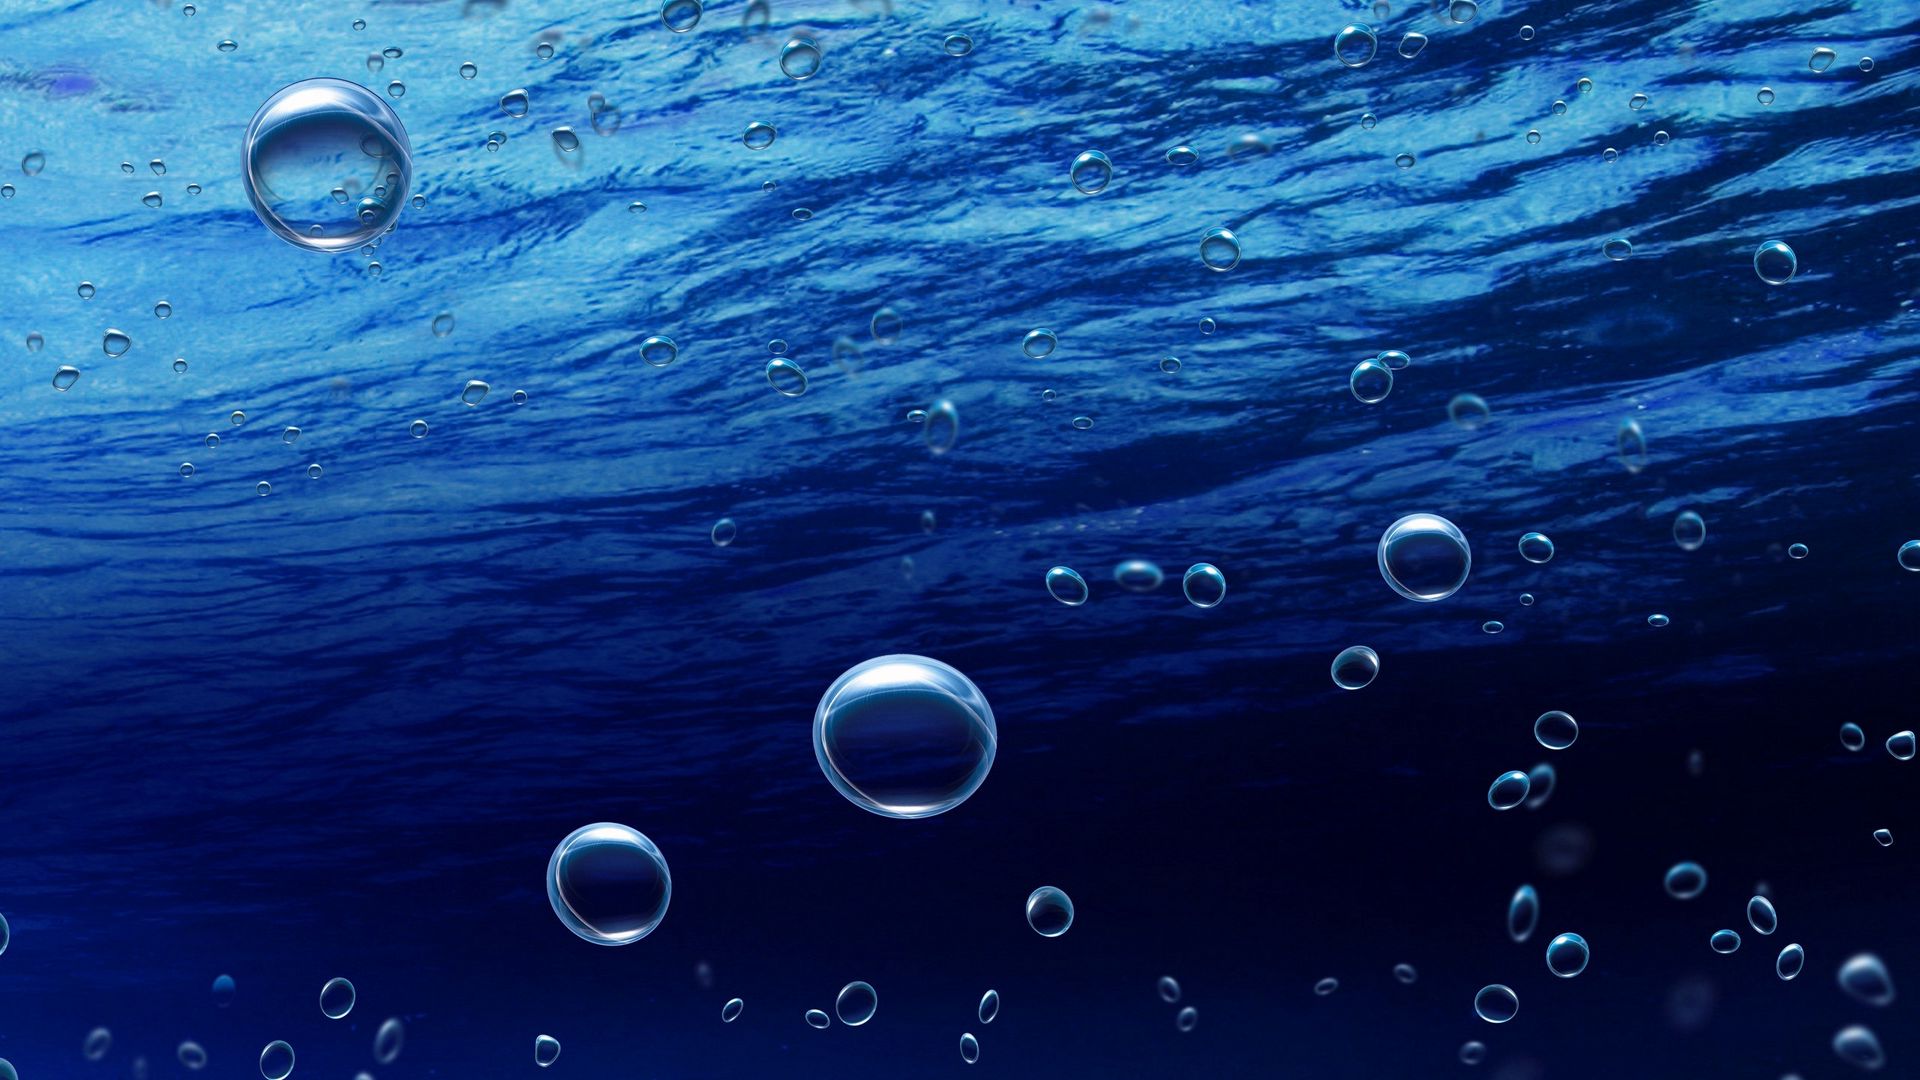 Download wallpaper 1920x1080 close-up, blue, water, drops full hd, hdtv,  fhd, 1080p hd background